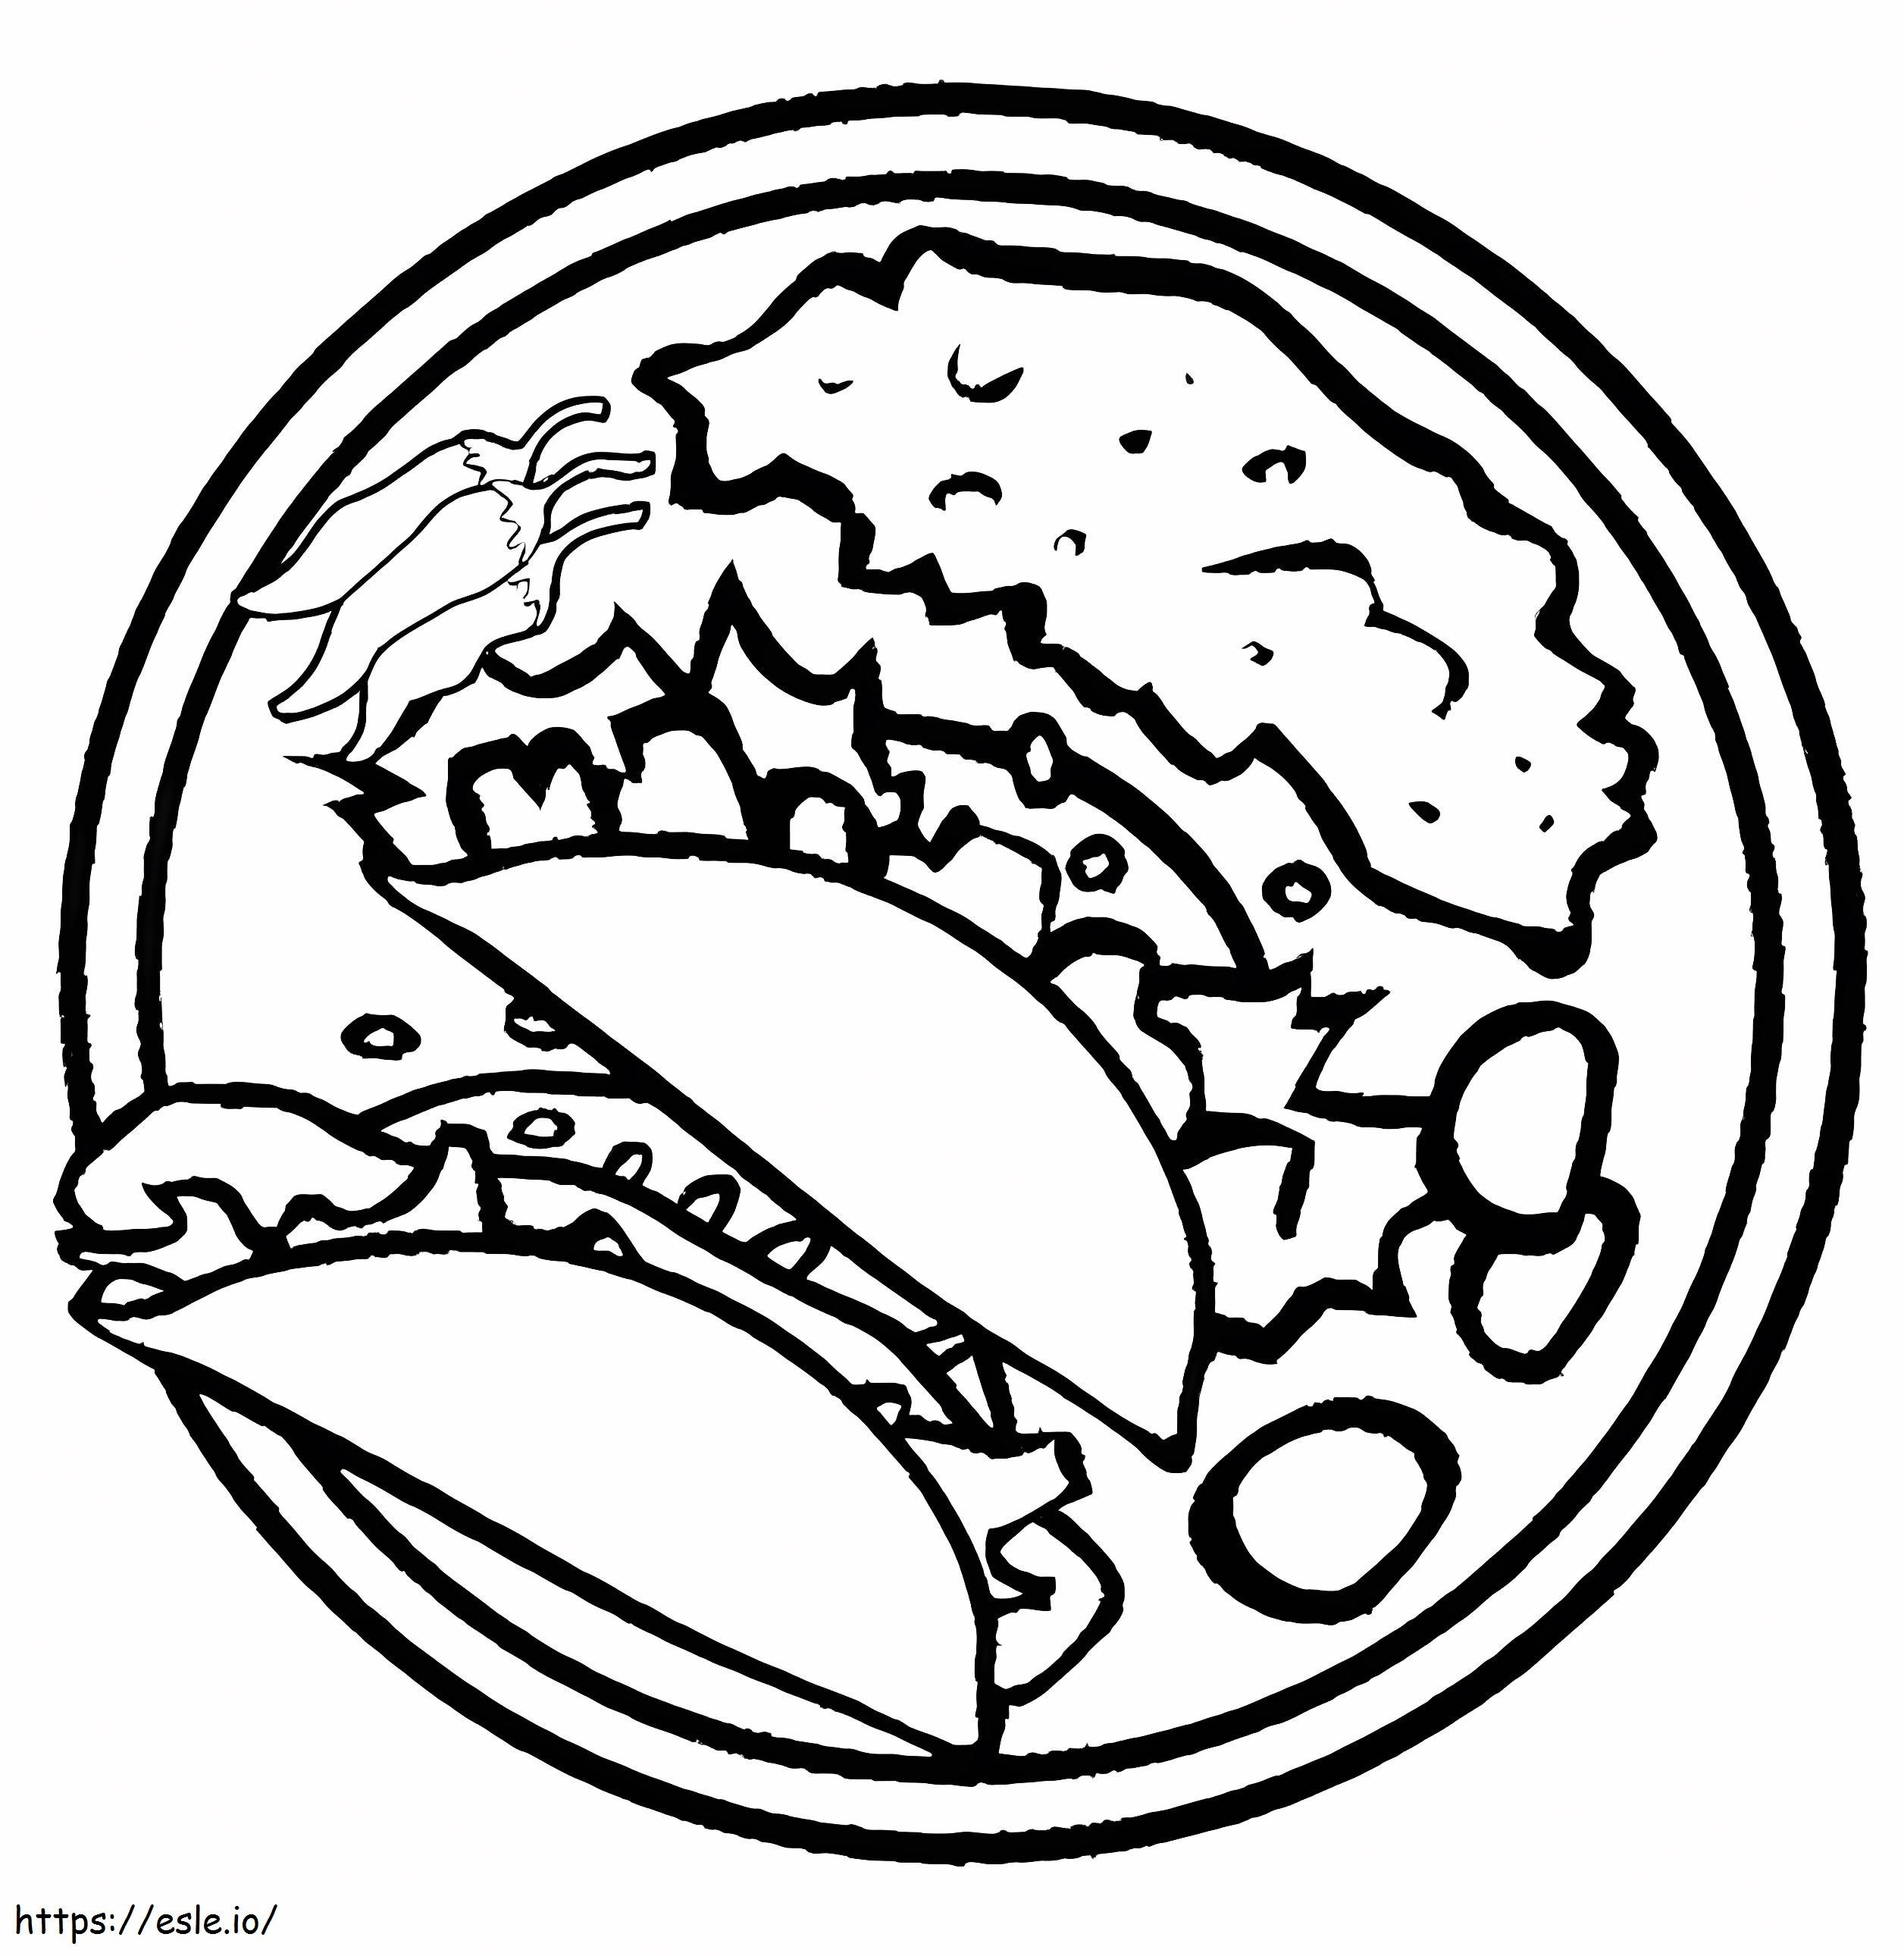 Tacos On Plate coloring page